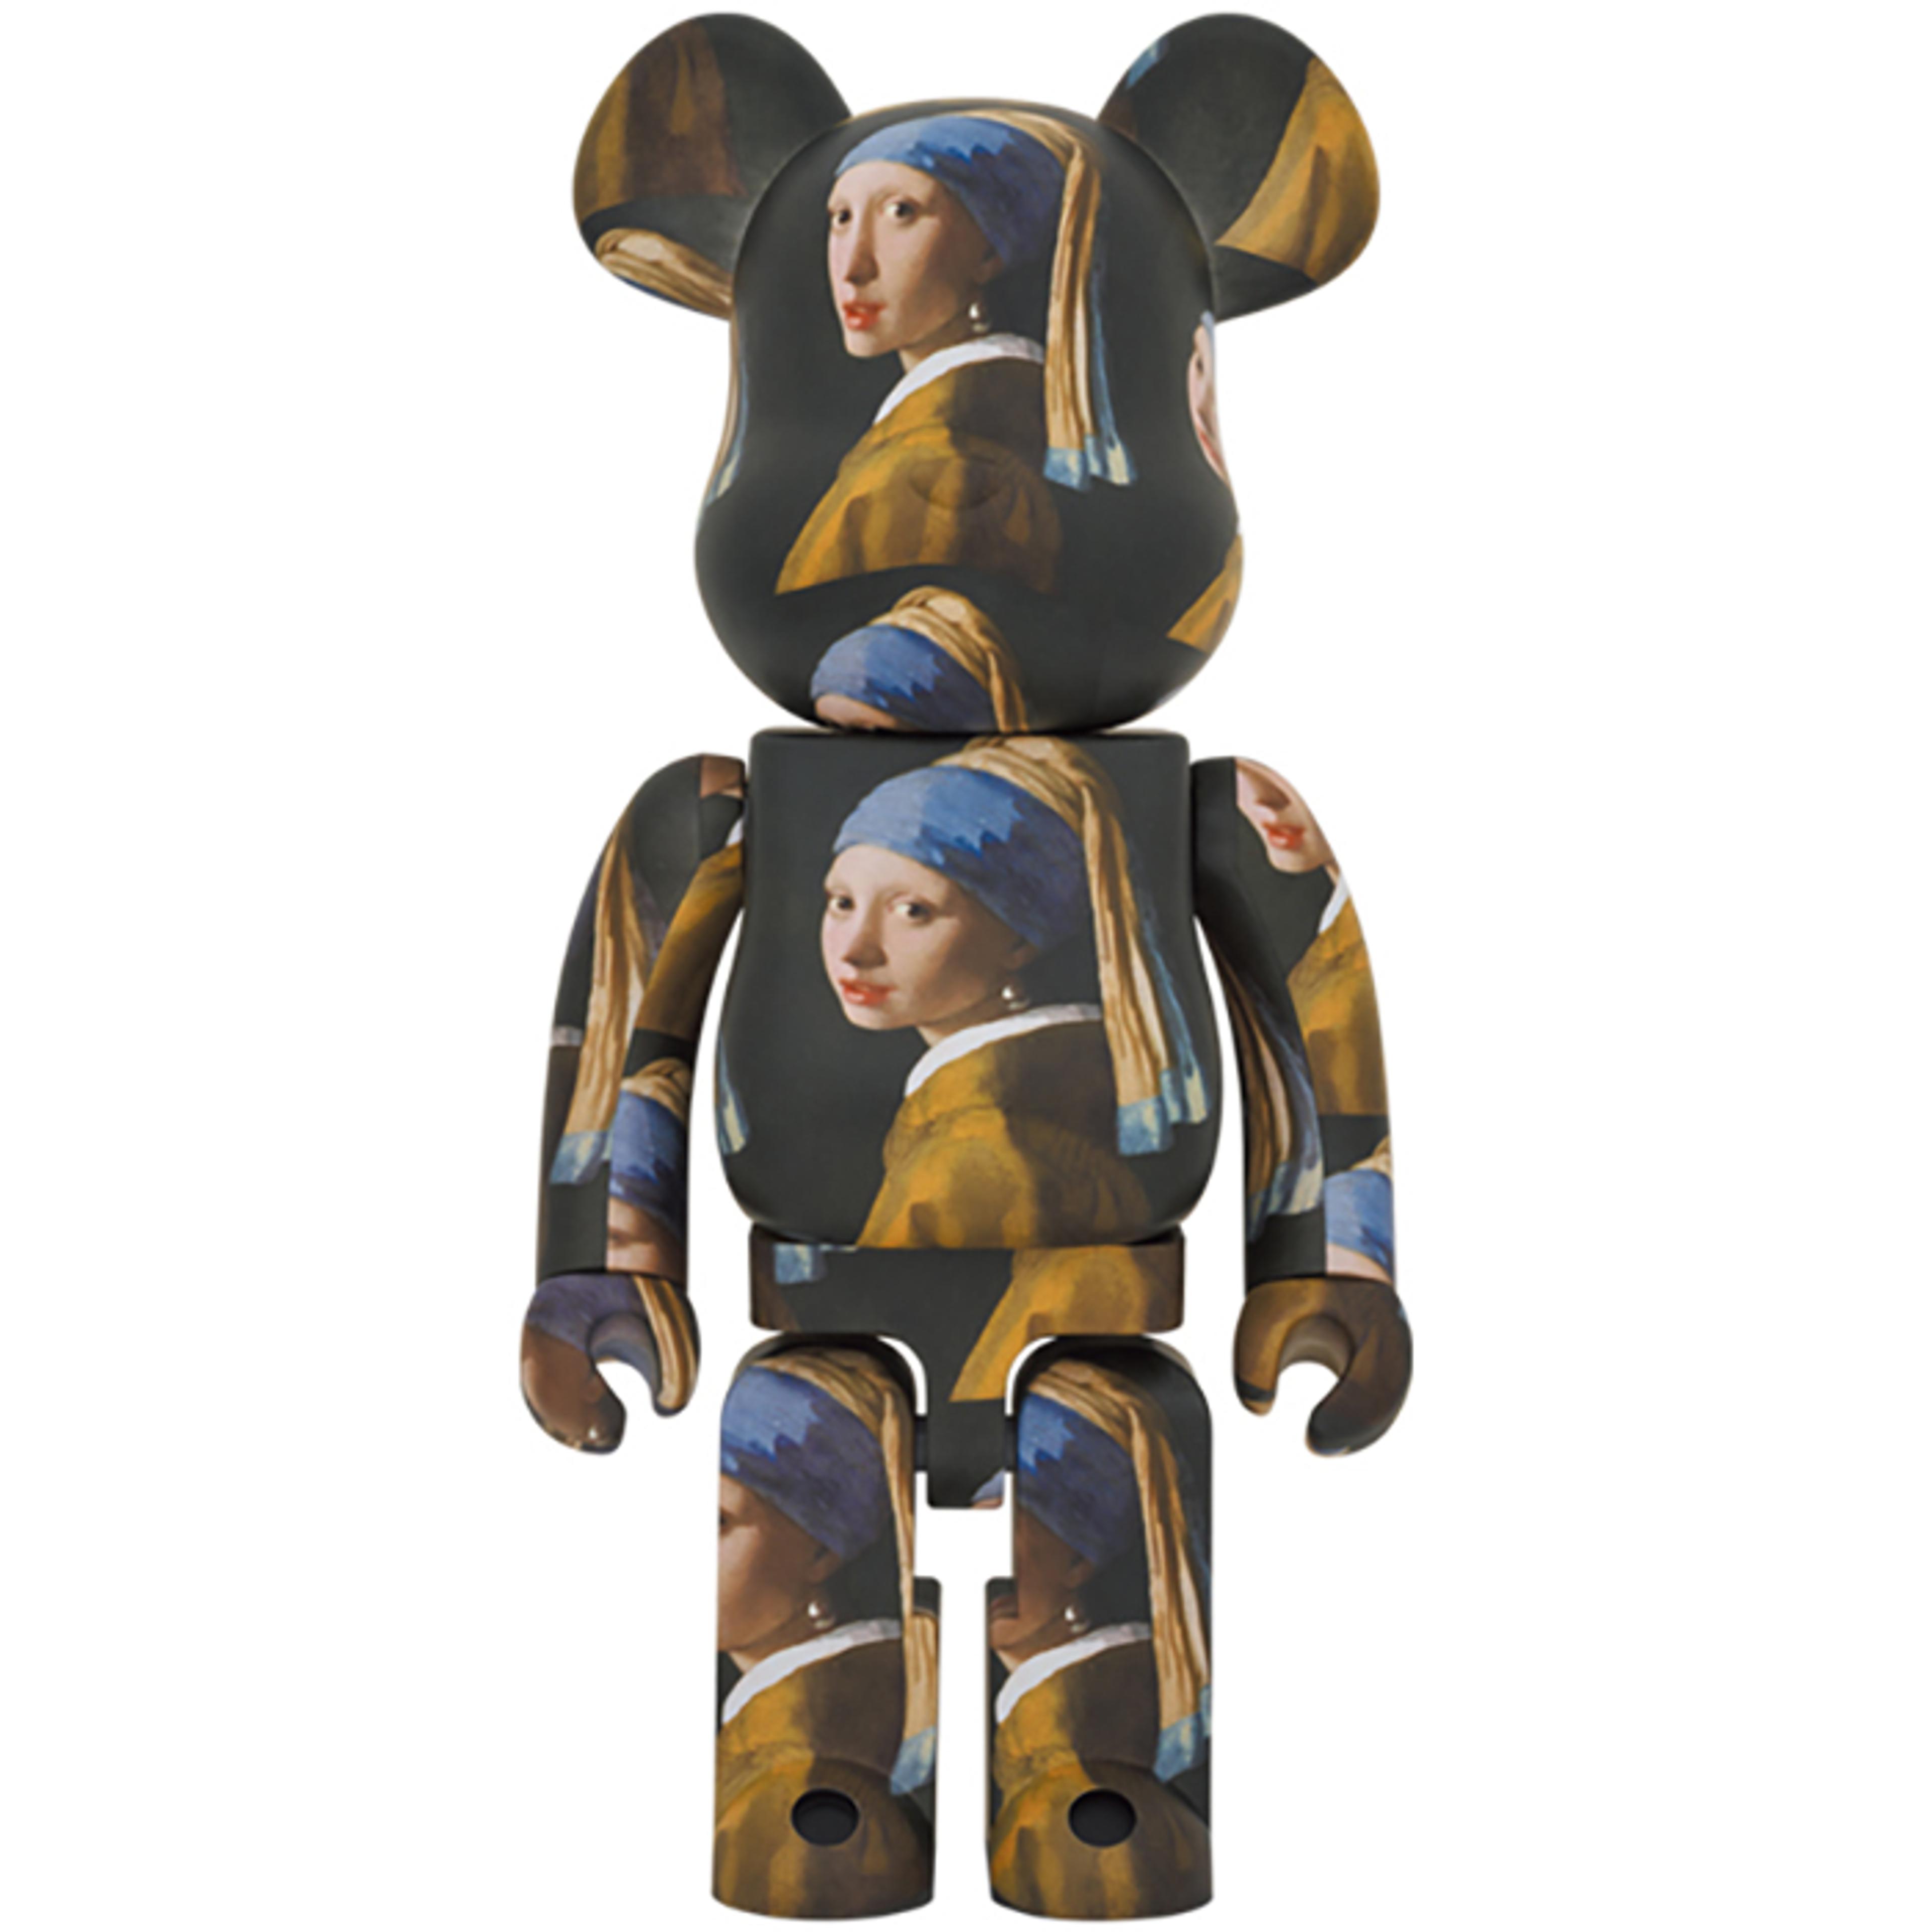 Alternate View 3 of BE@RBRICK JOHANNES VERMEER (GIRL WITH A PEARL EARRING) 1000%